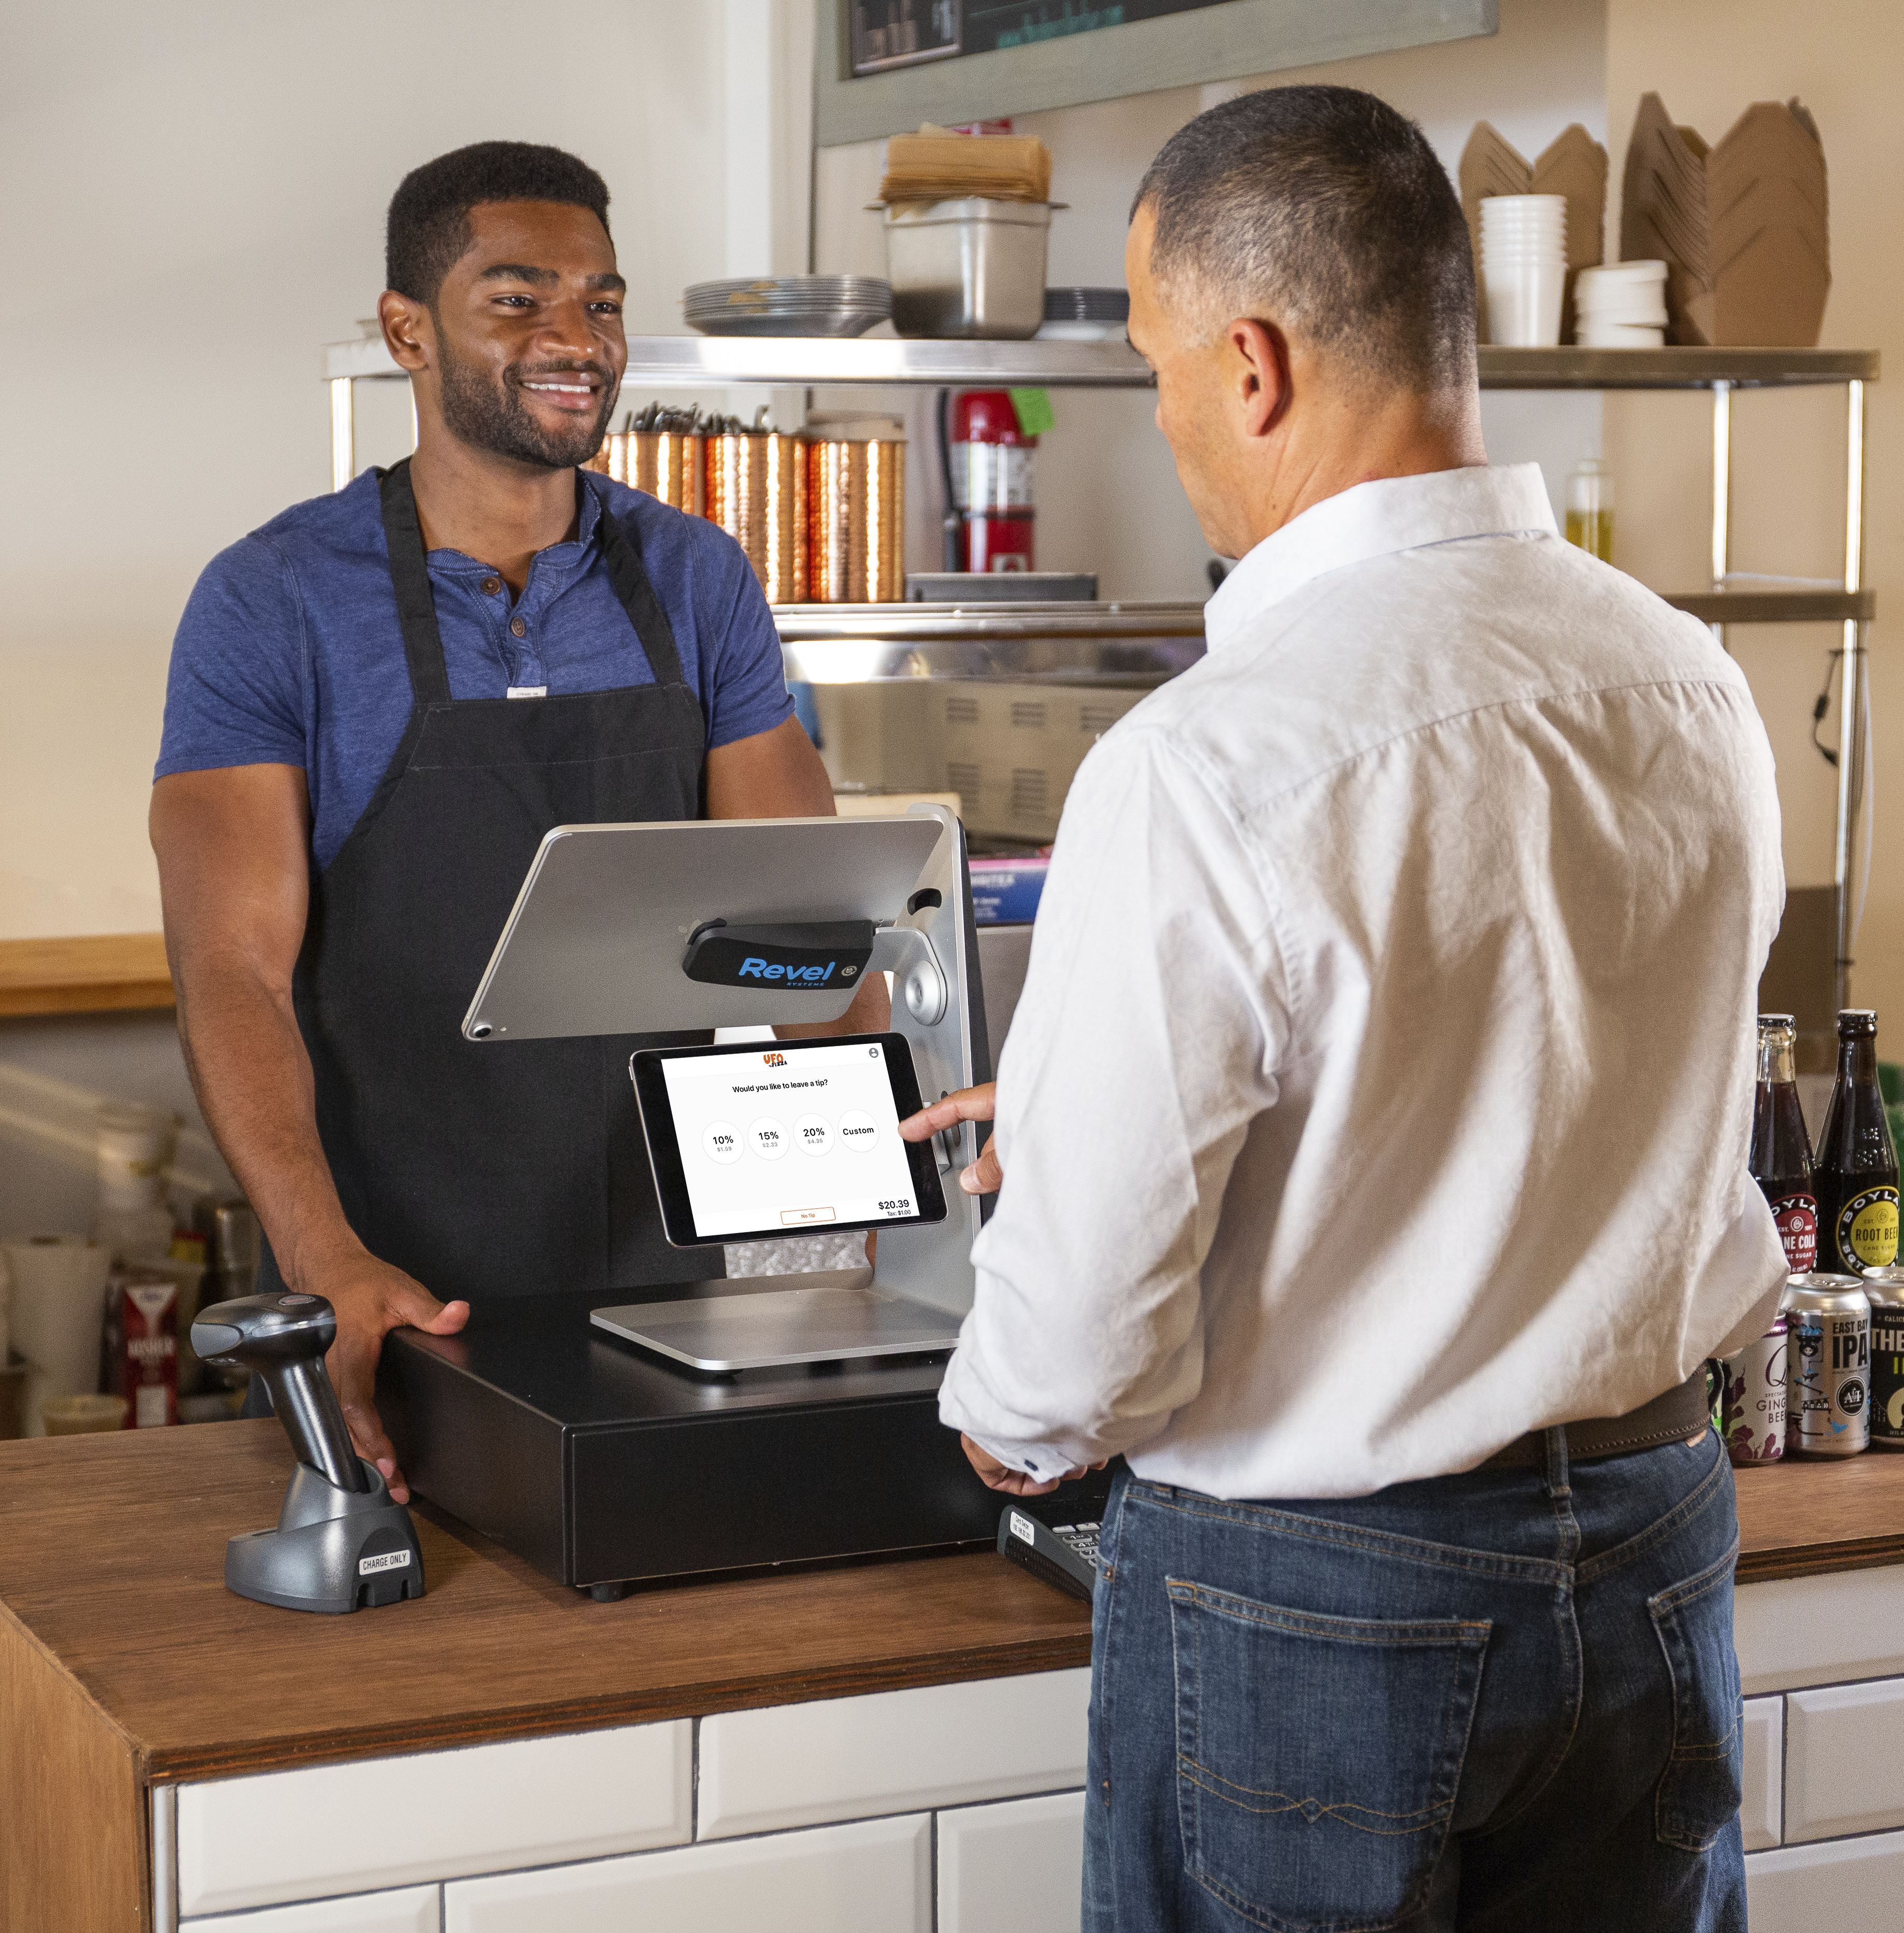 5 Coffee Shop Technologies to Brew Up Business